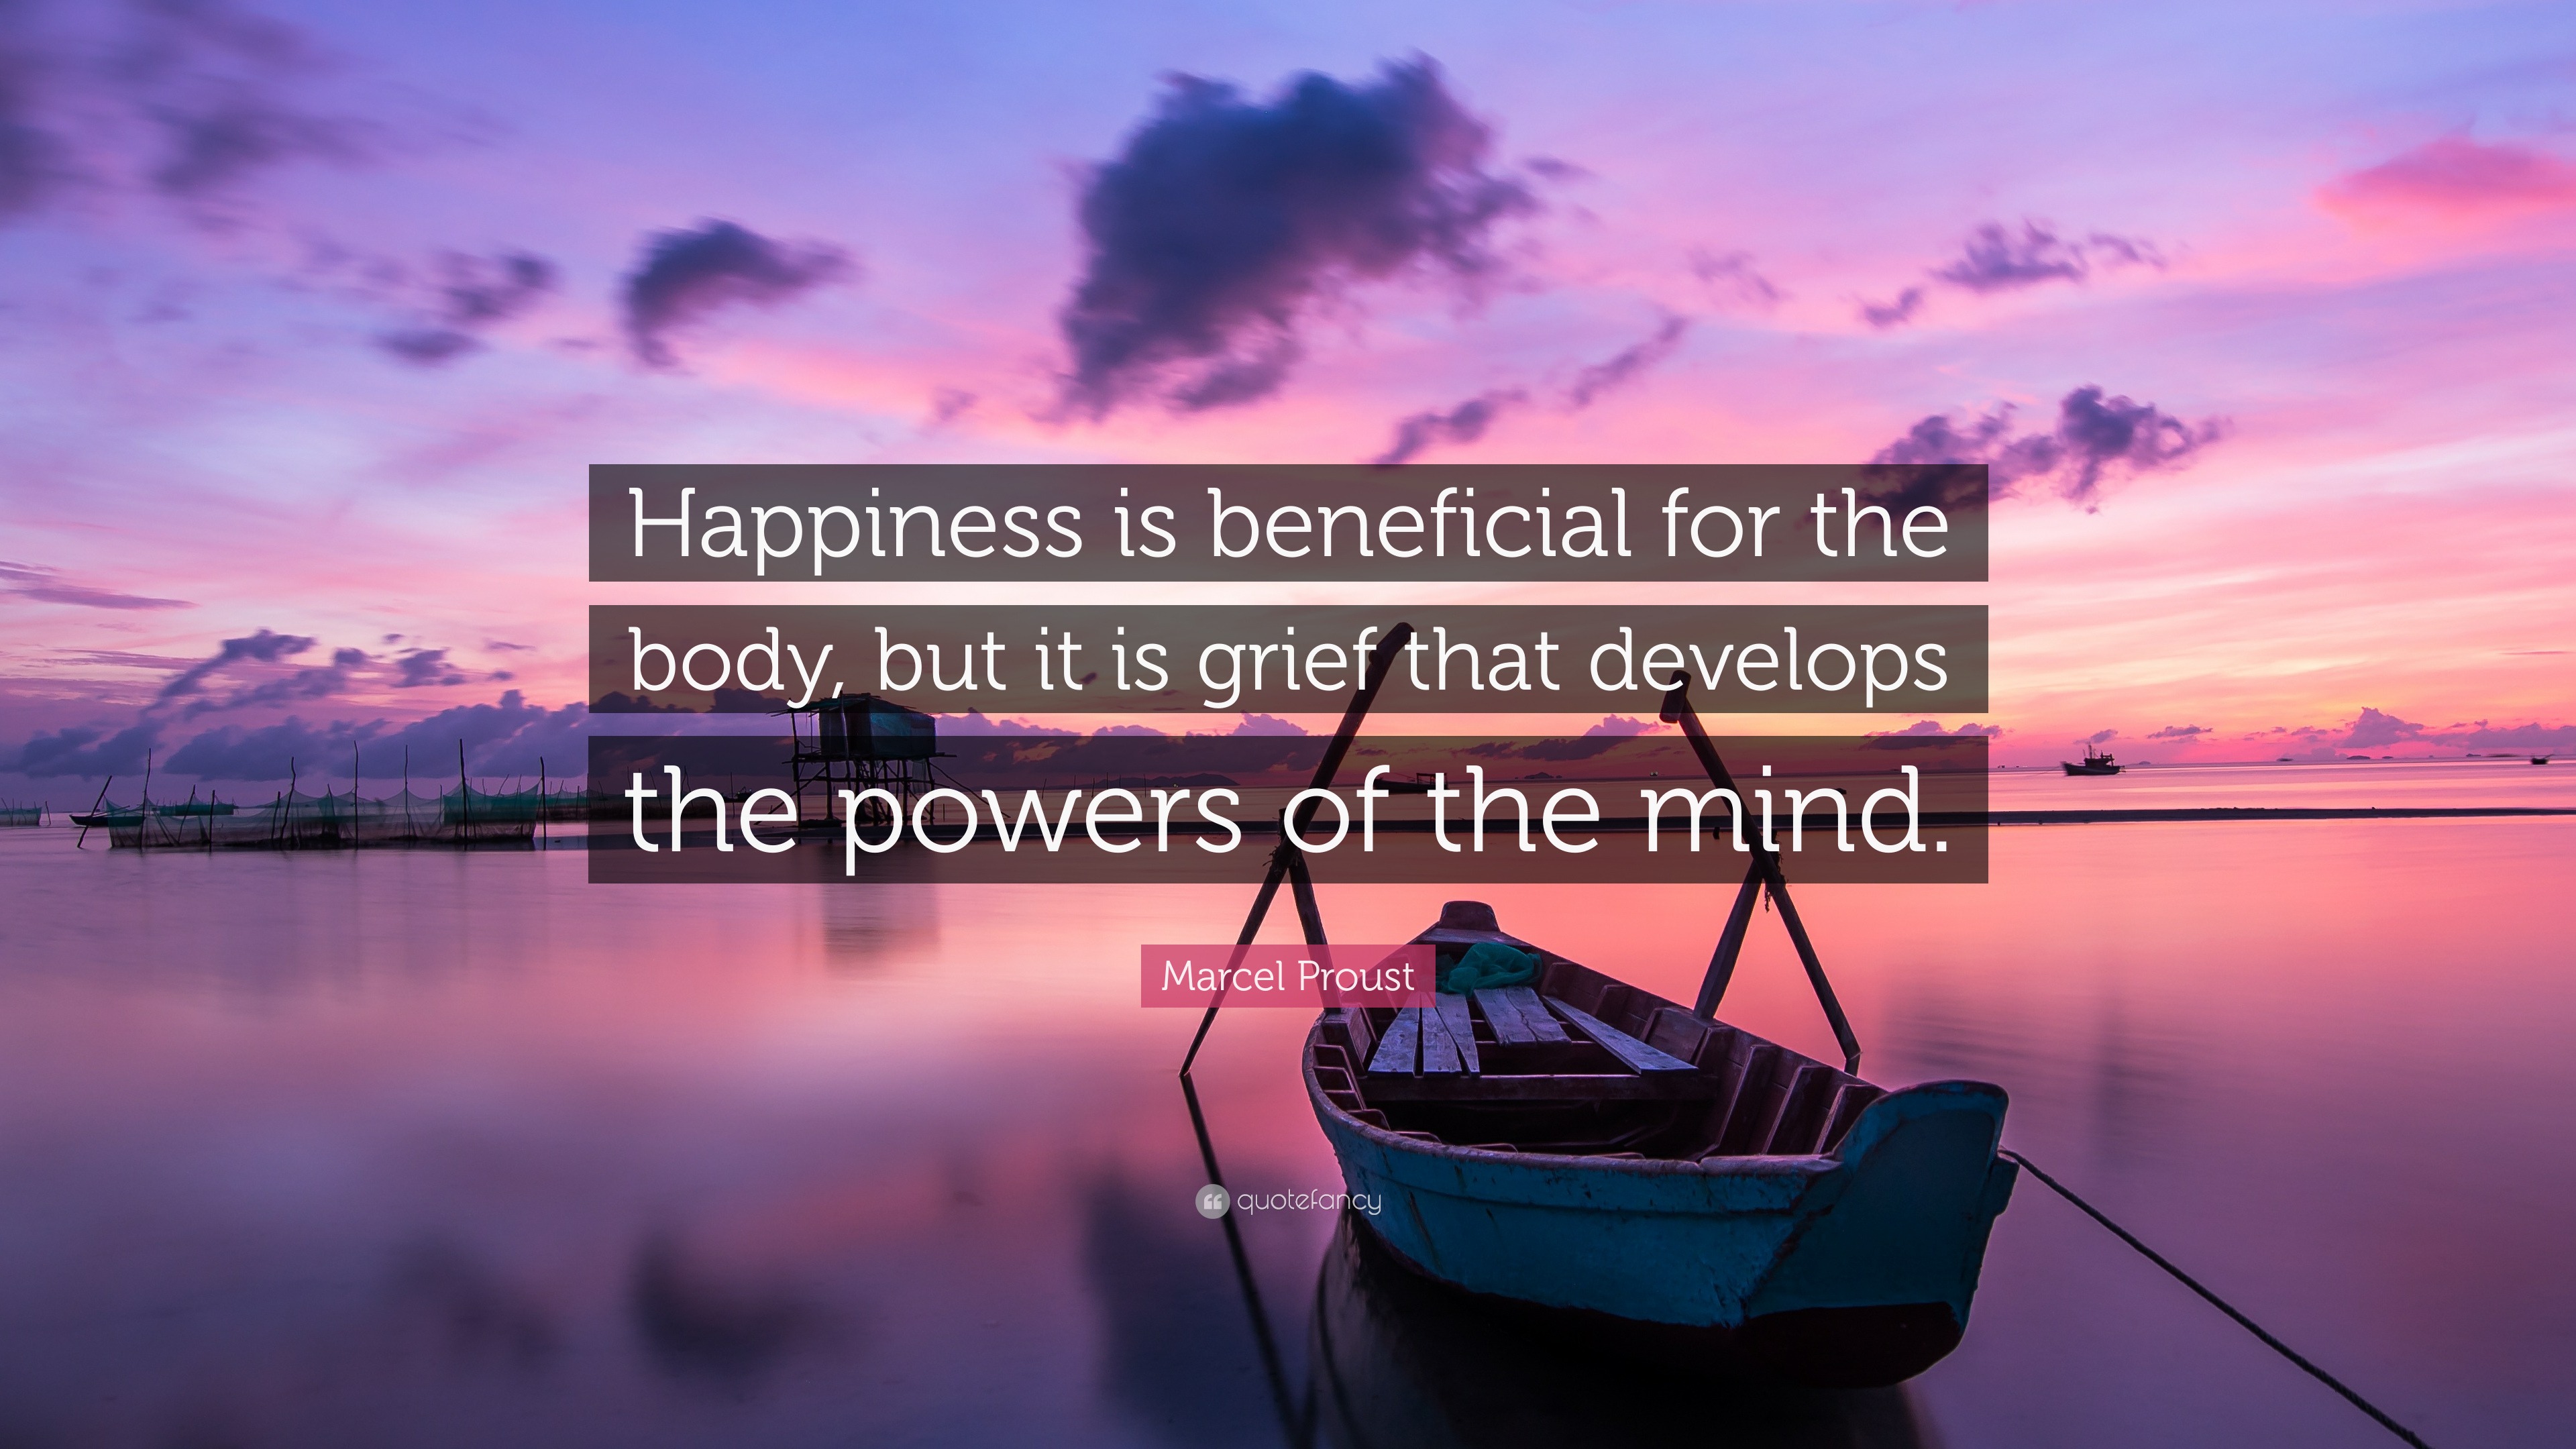 Marcel Proust Quote: “Happiness is beneficial for the body, but it is ...